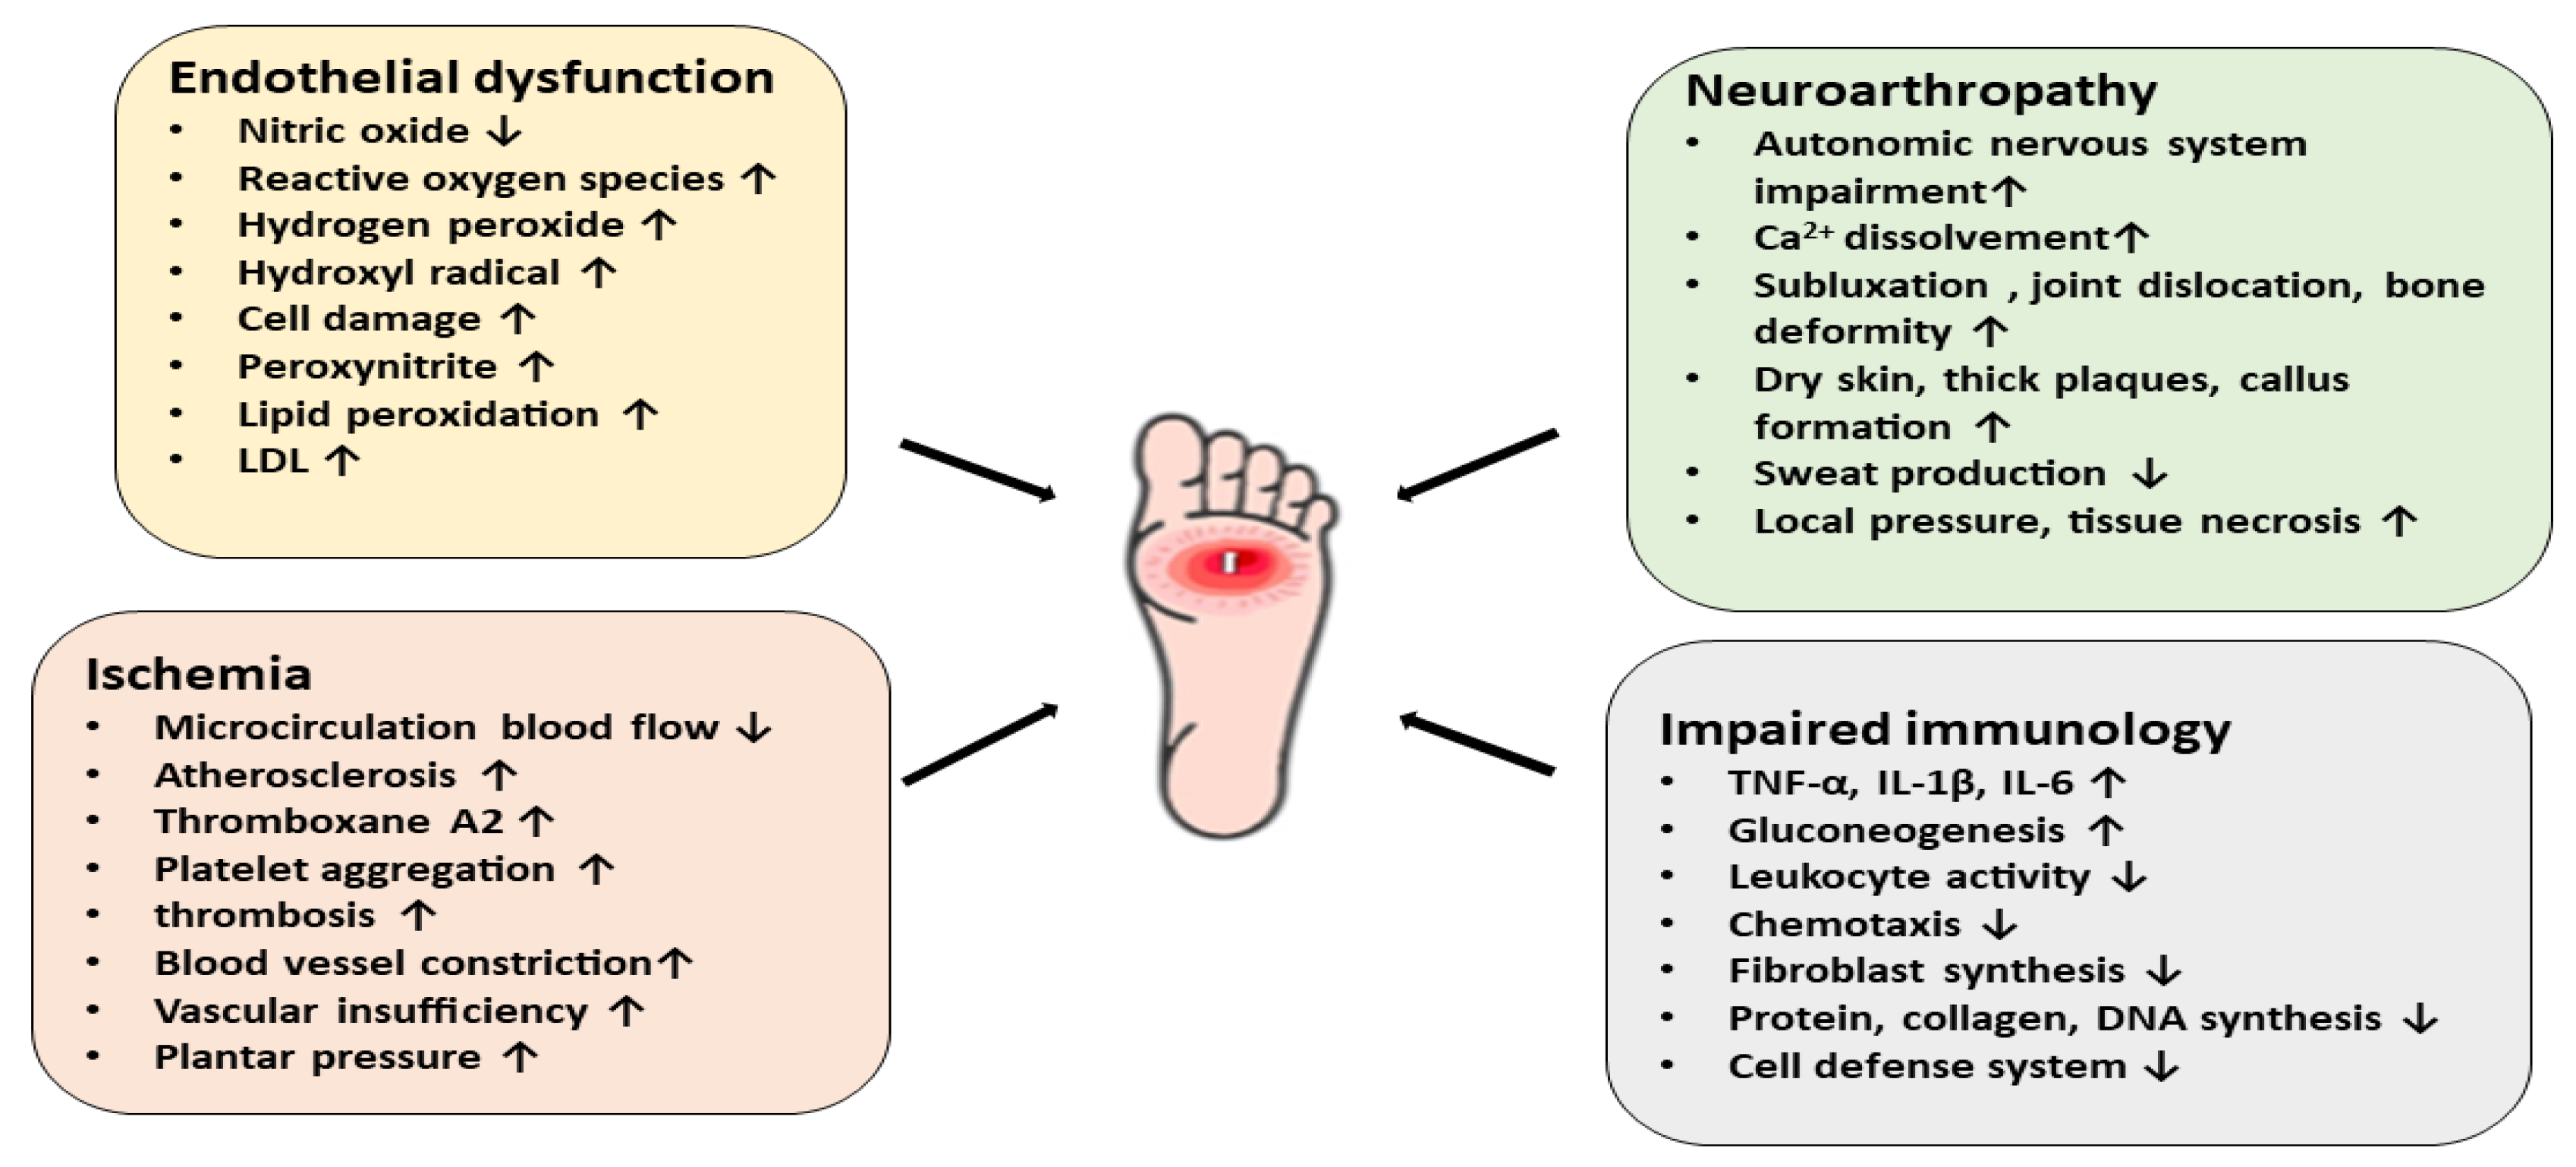 Chronic hyperglycemia and foot ulcers